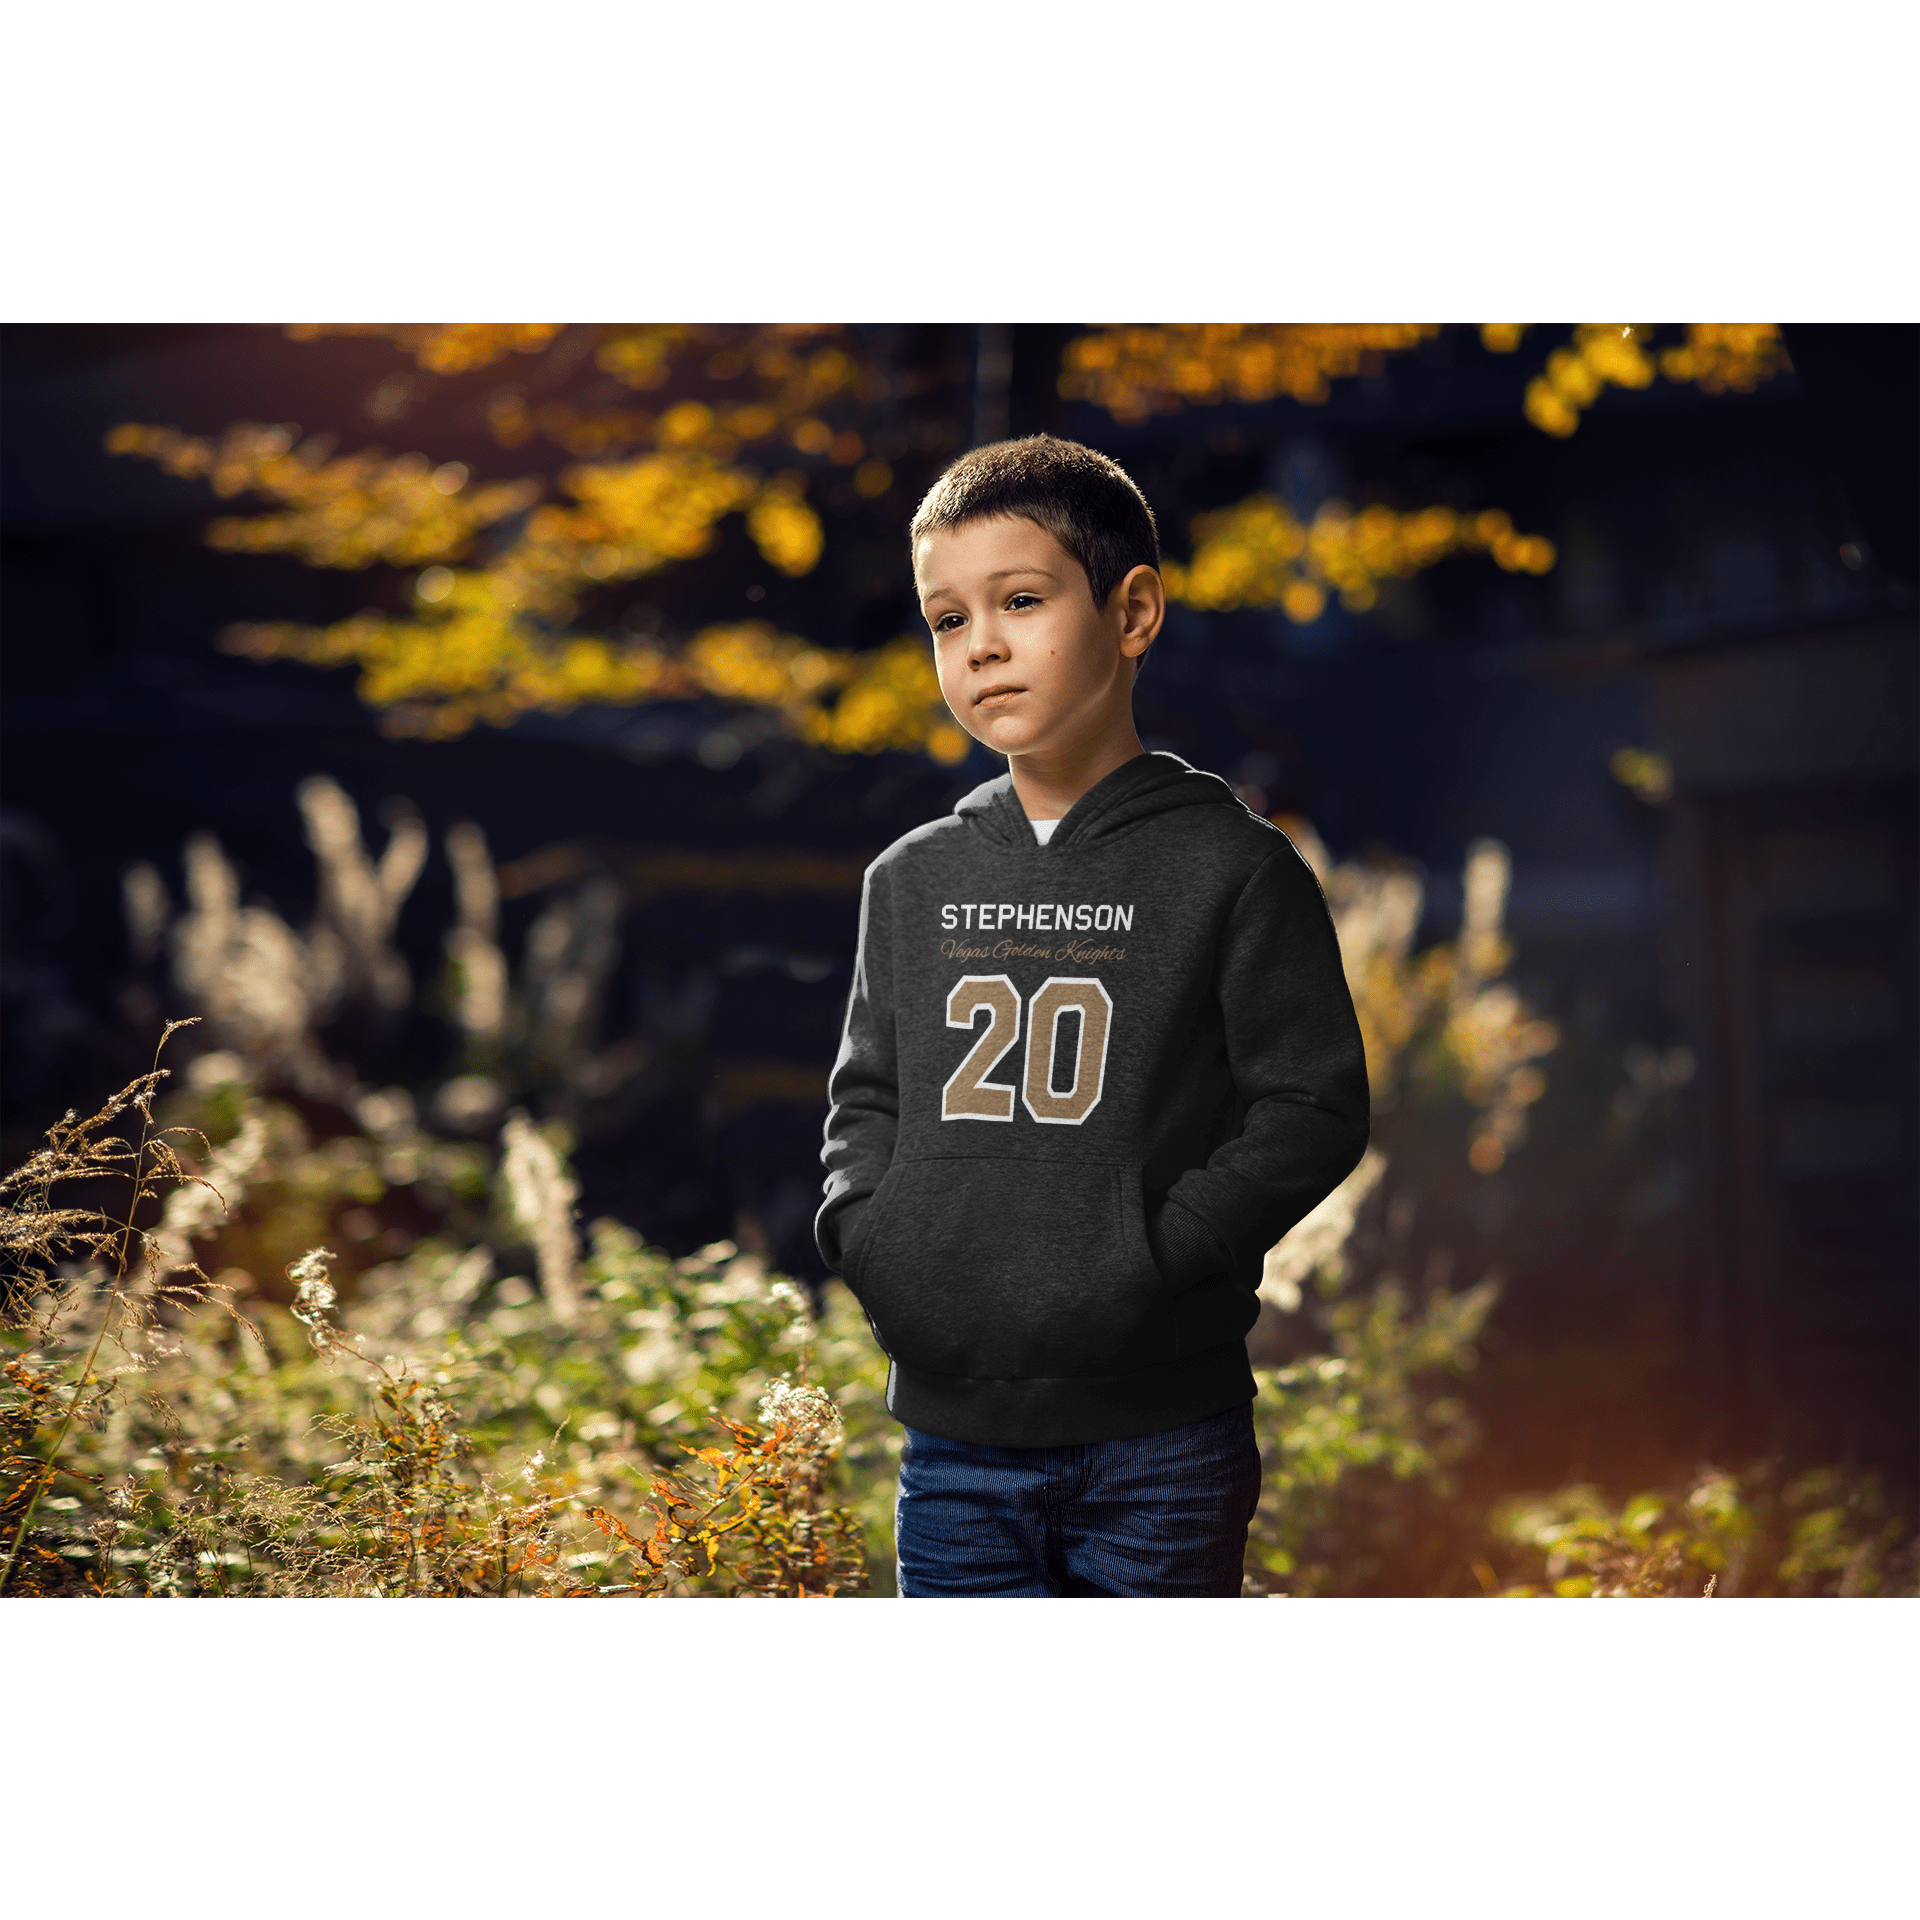 Kids clothes Stephenson 20 Vegas Golden Knights Youth Hooded Sweatshirt